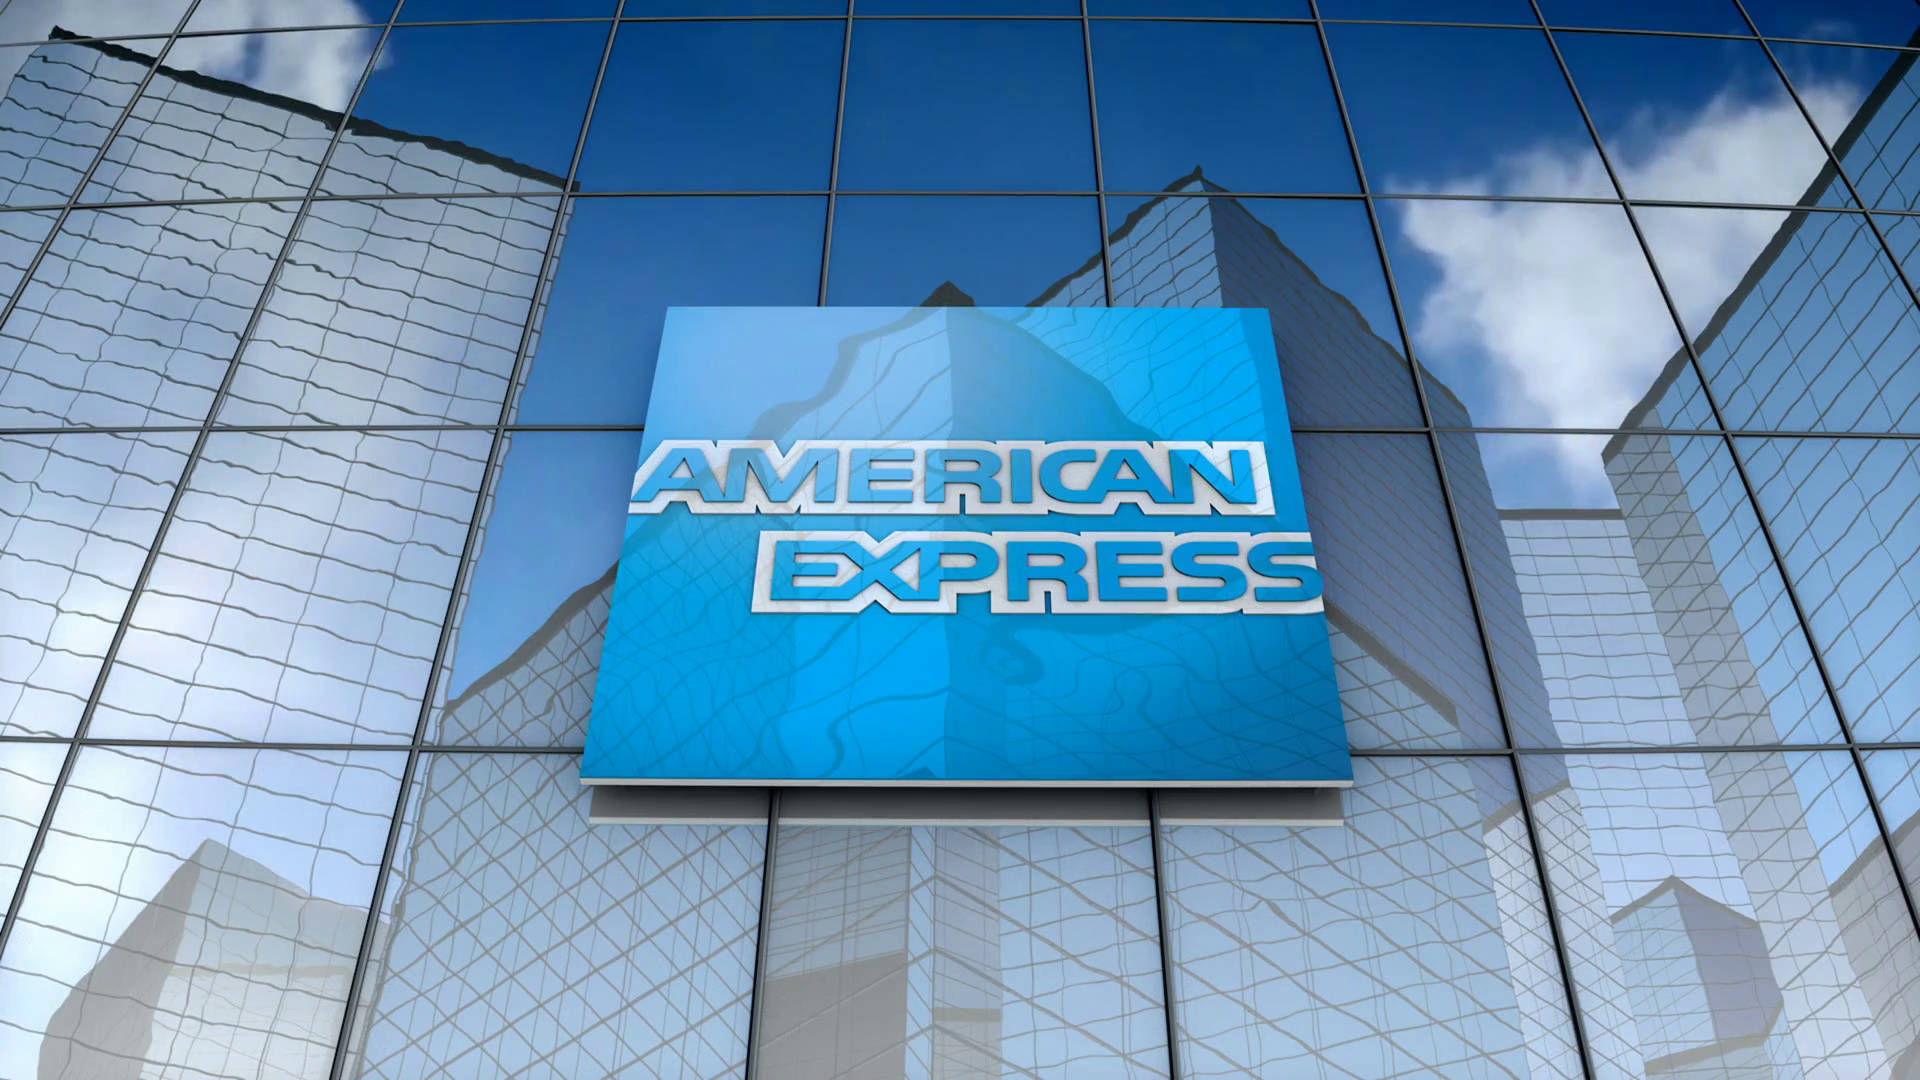 American Express Blue City Signage Background